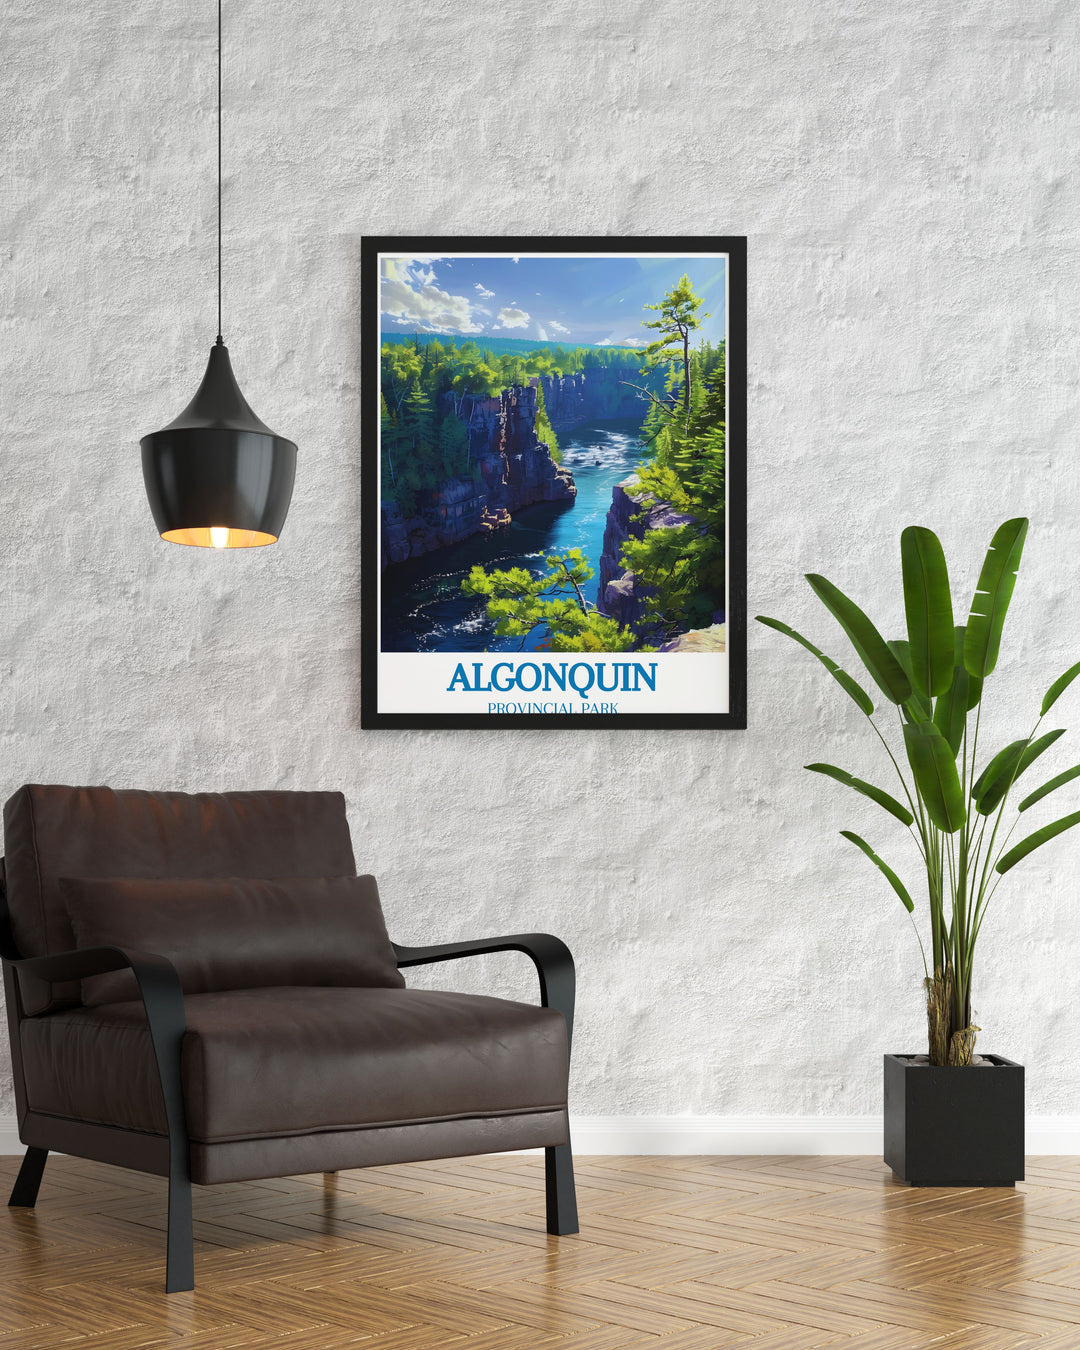 Vintage poster of the Algonquin Logging Museum, blending historical Canadian logging scenes with modern art styles for a unique wall piece.